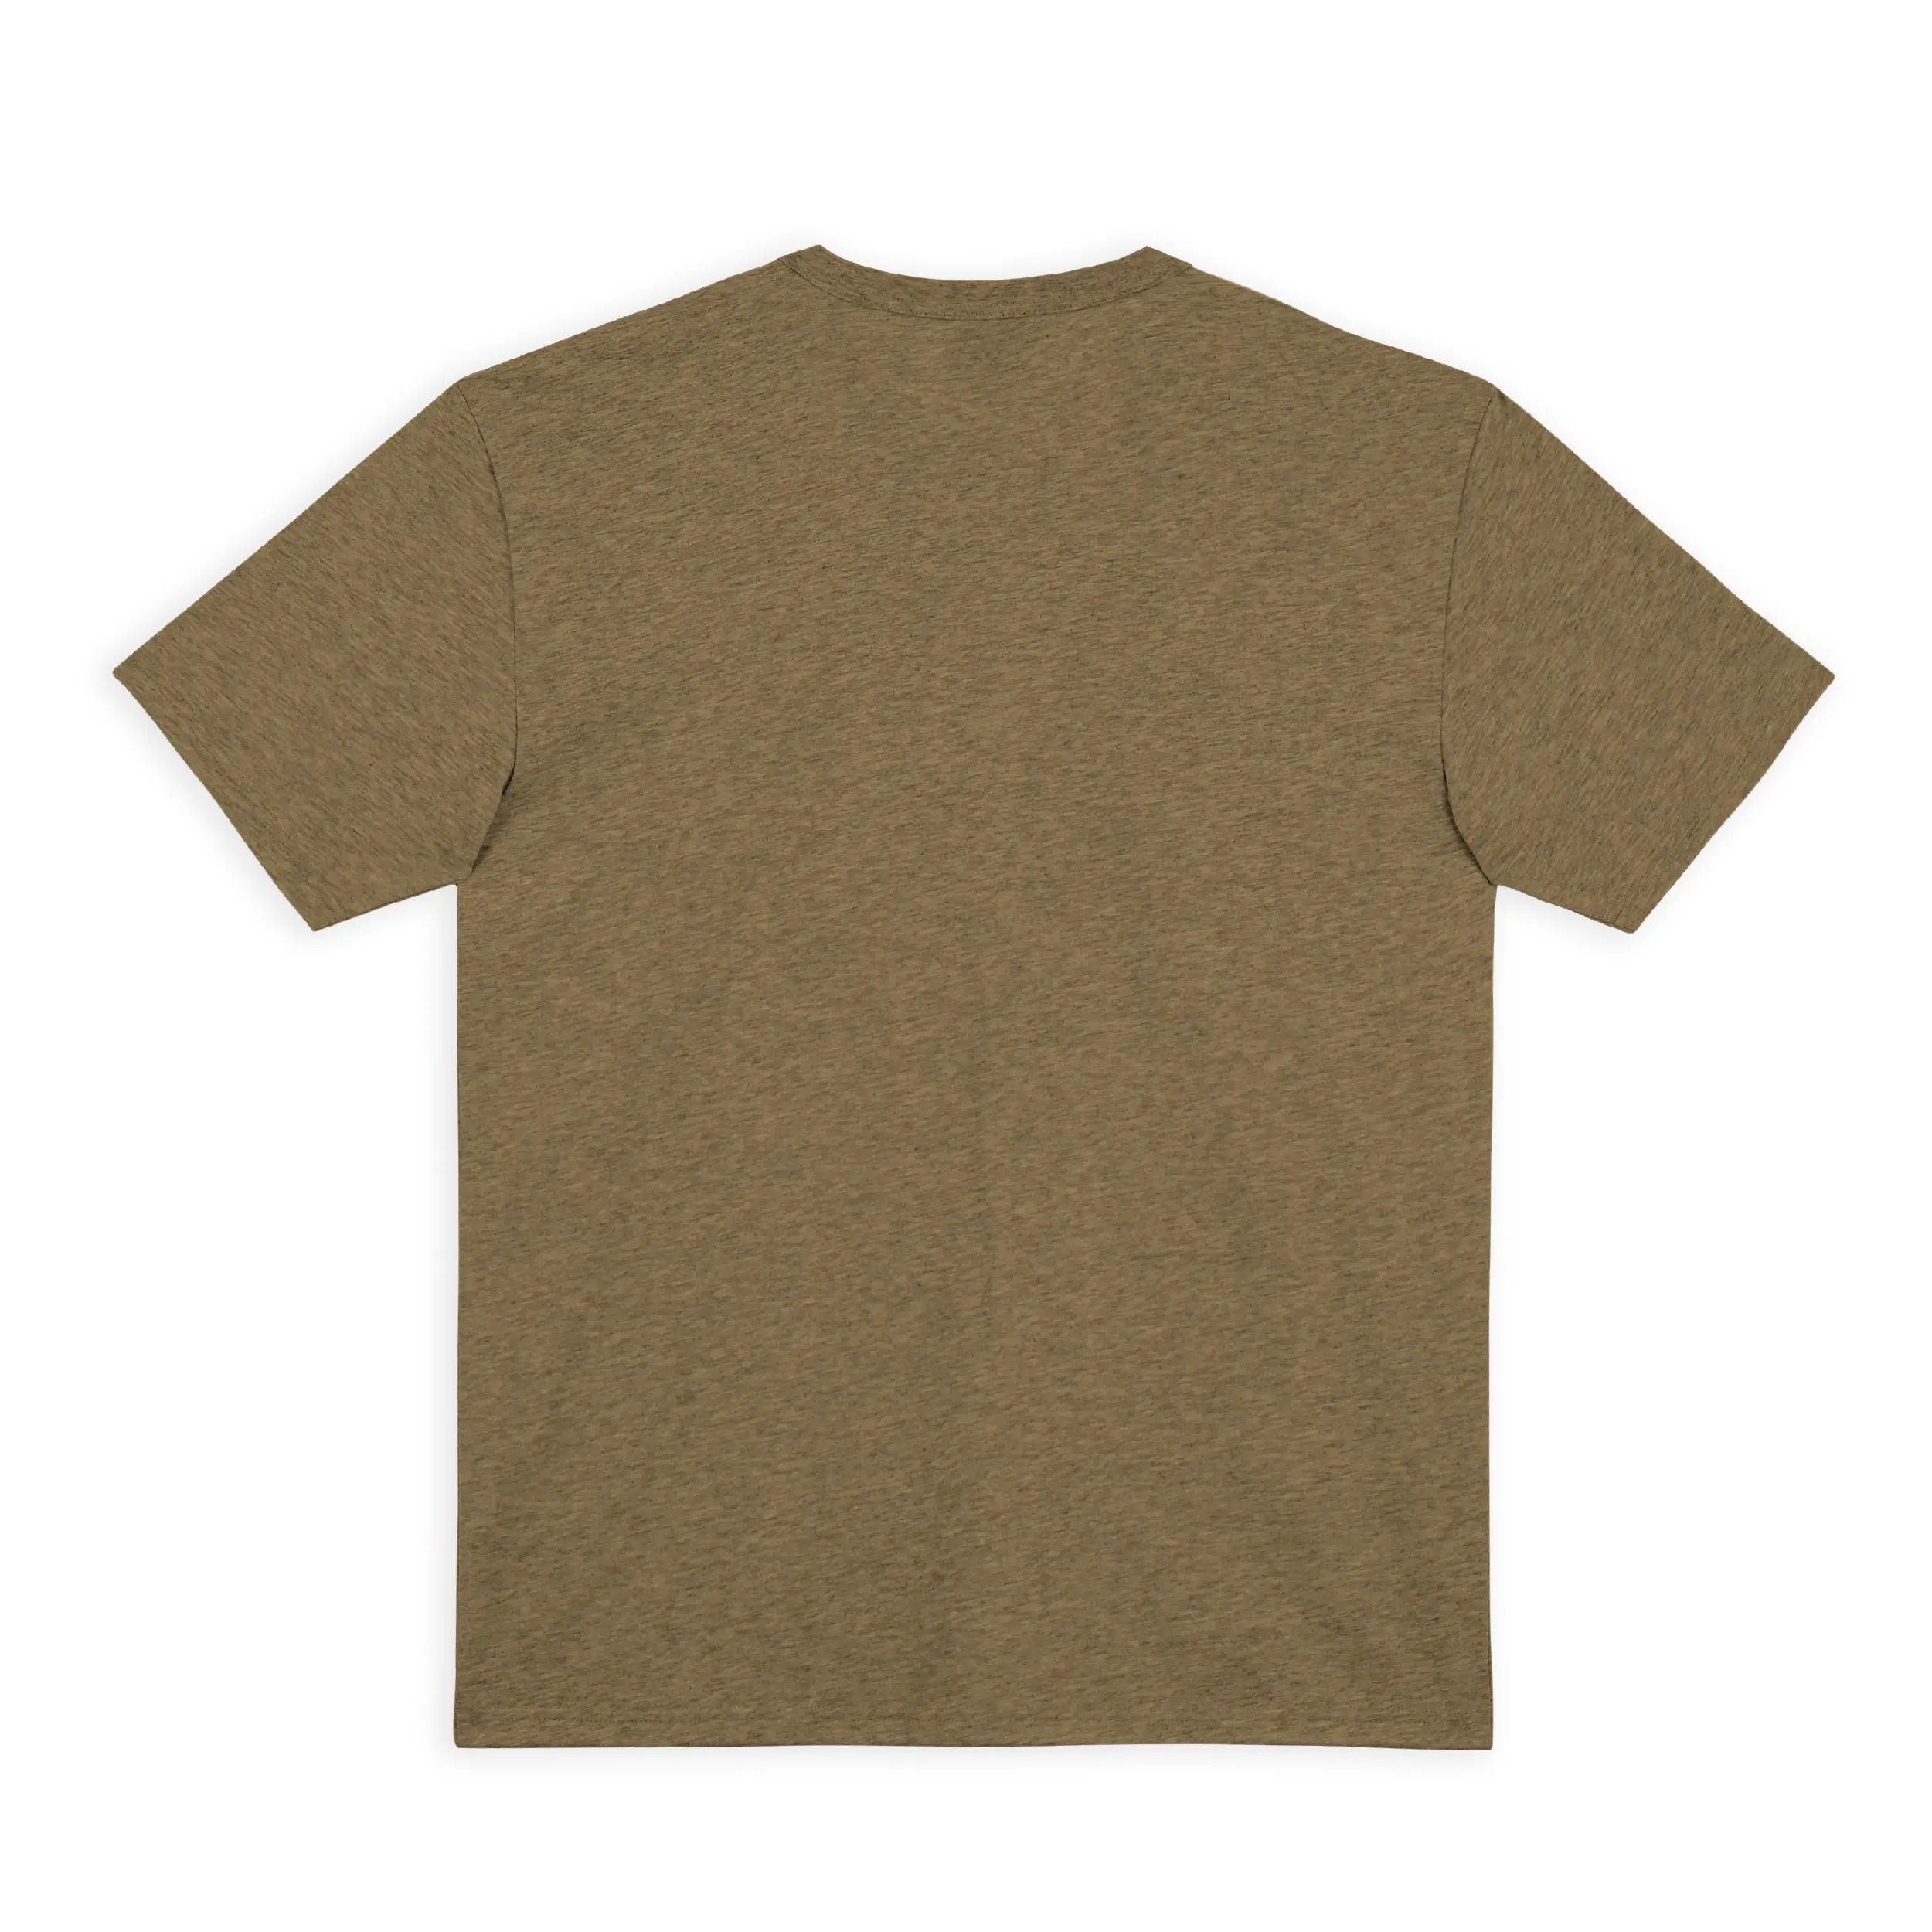 M's Signature T-Shirt S / Heather Coyote